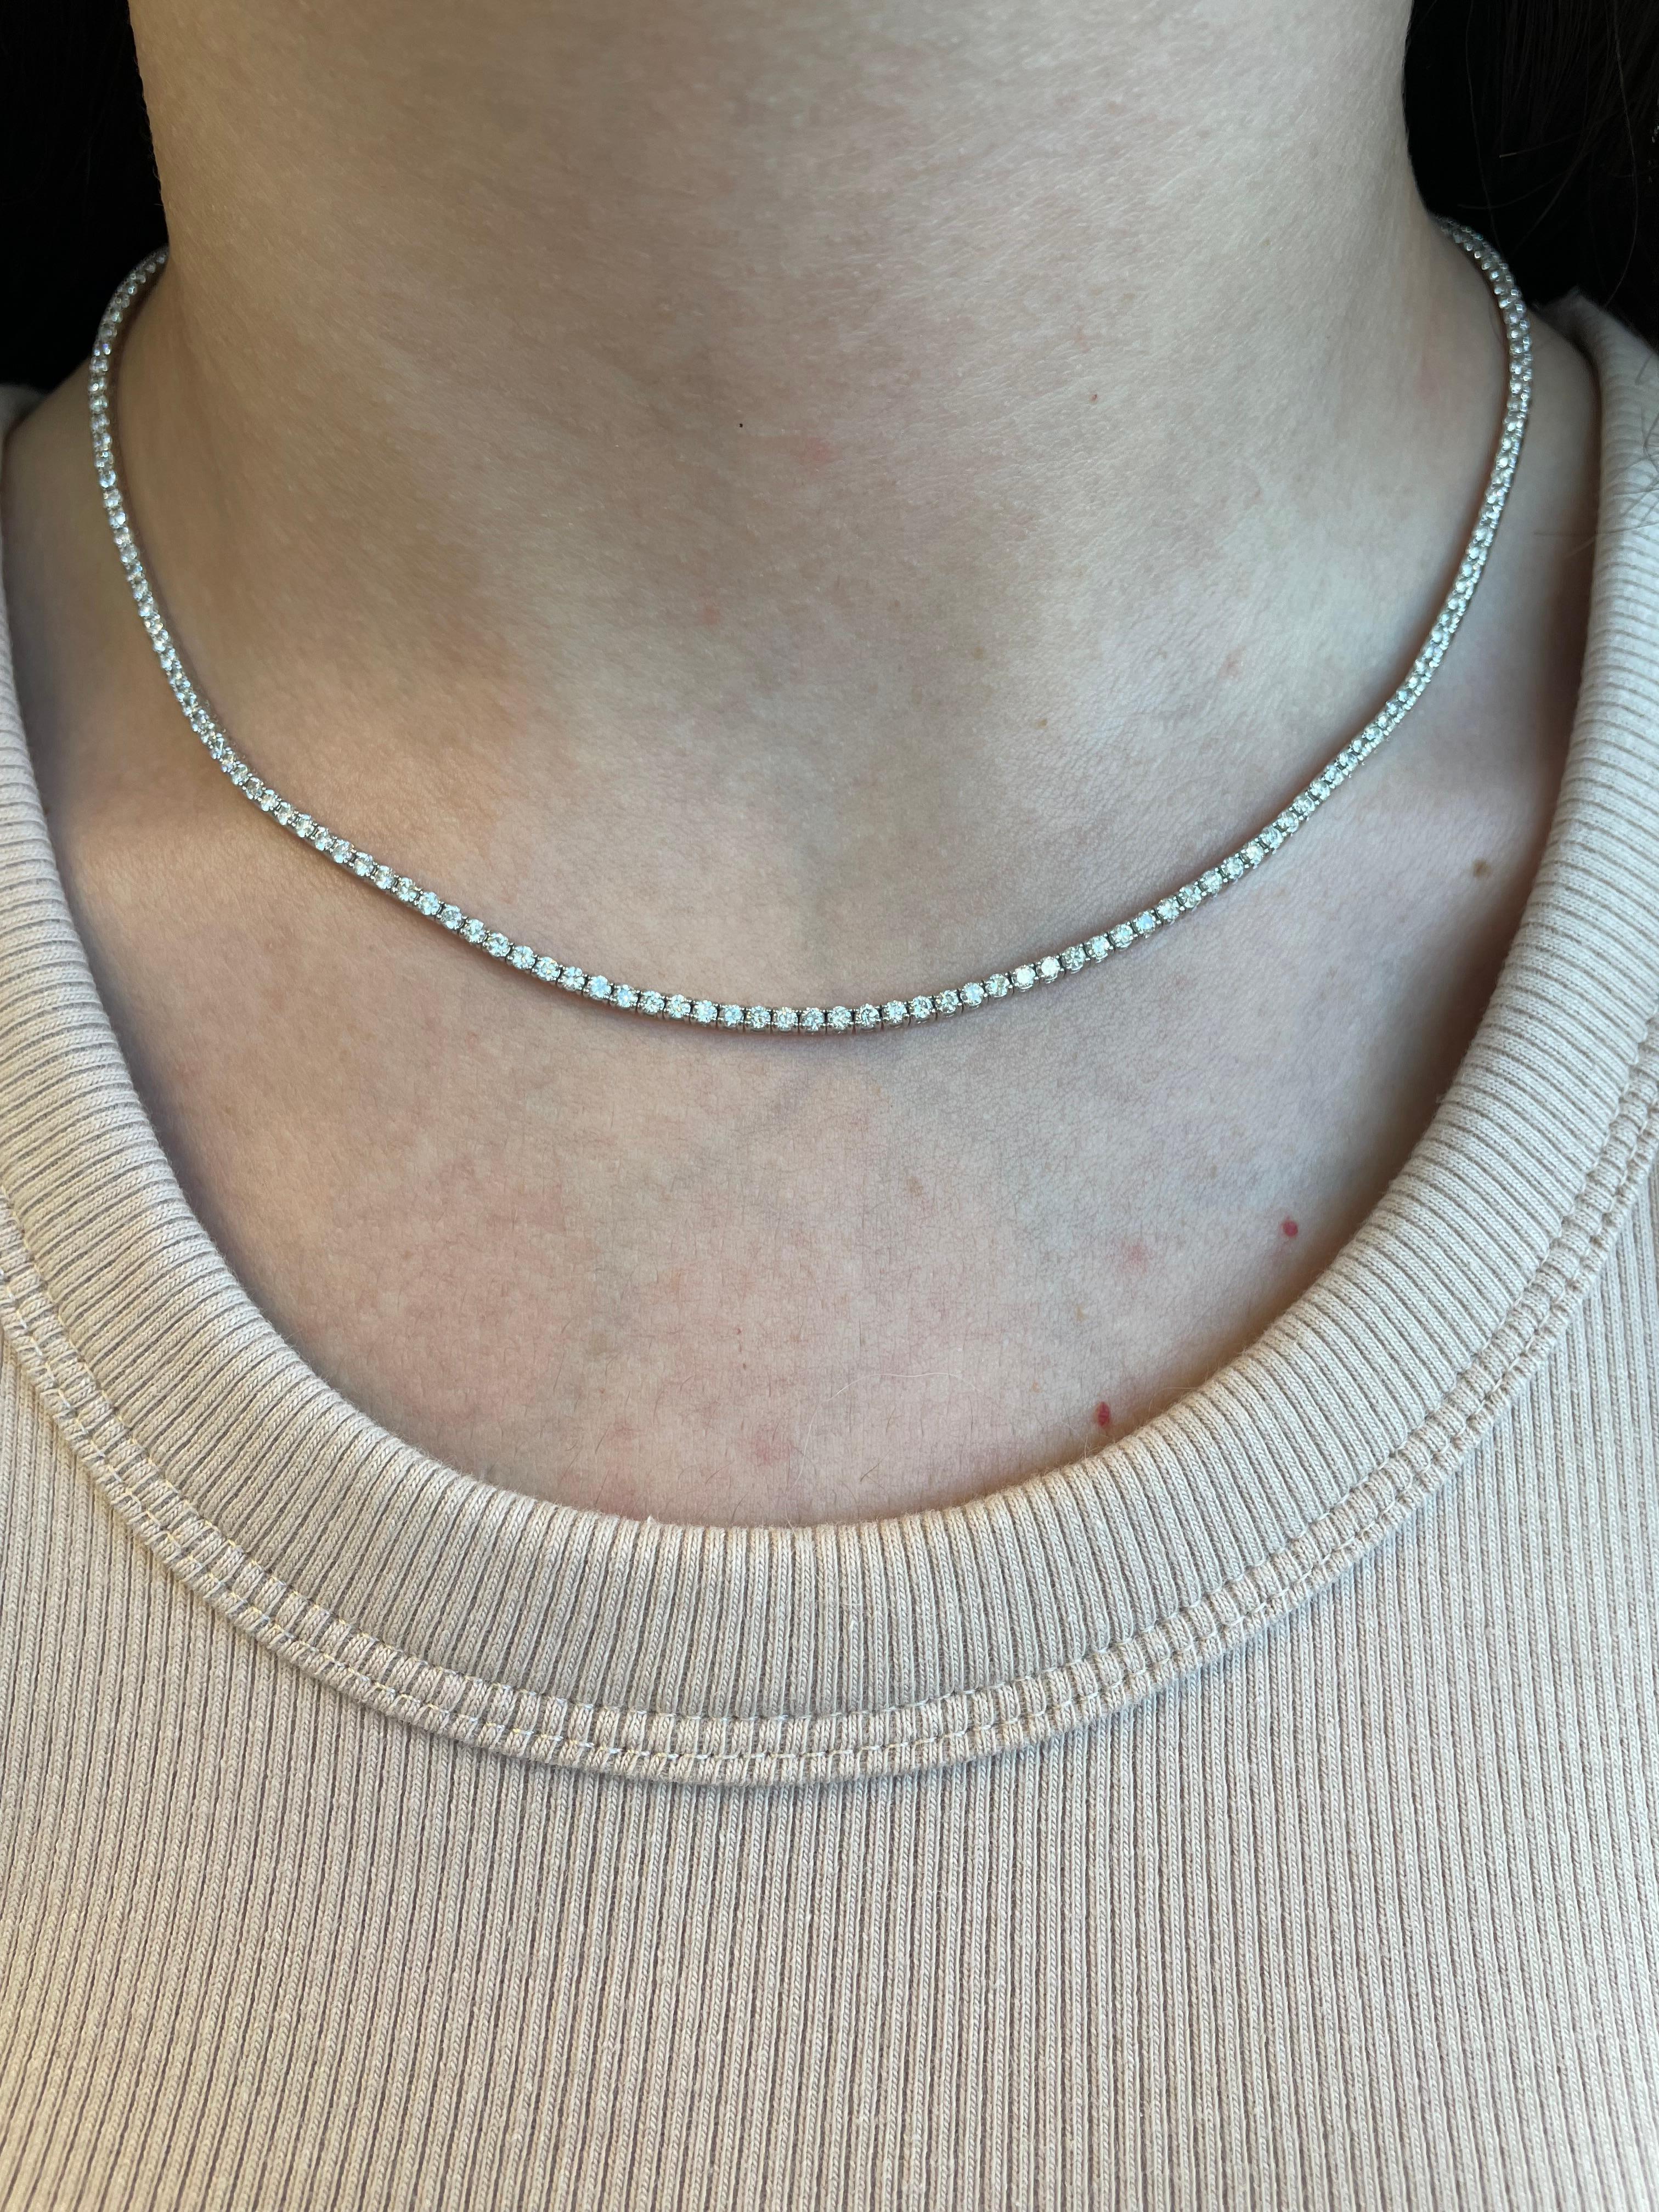 Beautiful modern diamond tennis necklace. By Alexander Beverly Hills.
4.75 carats of round brilliant diamonds, approximately G/H color and SI clarity. 17 inches, 18k white gold.
Accommodated with an up to date appraisal by a GIA G.G., please contact